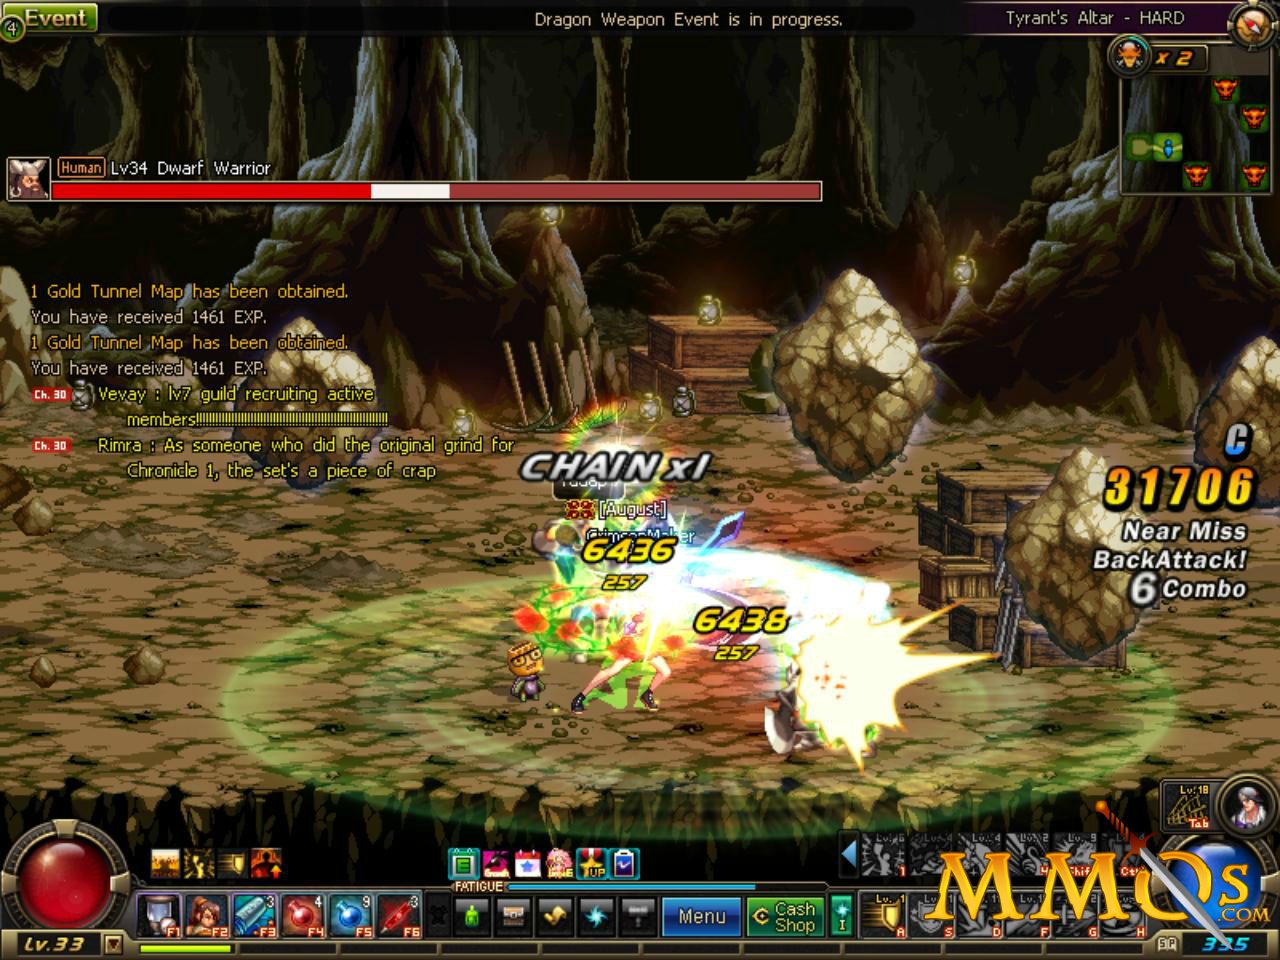 Dungeon Fighter Online  Download and Play for Free - Epic Games Store